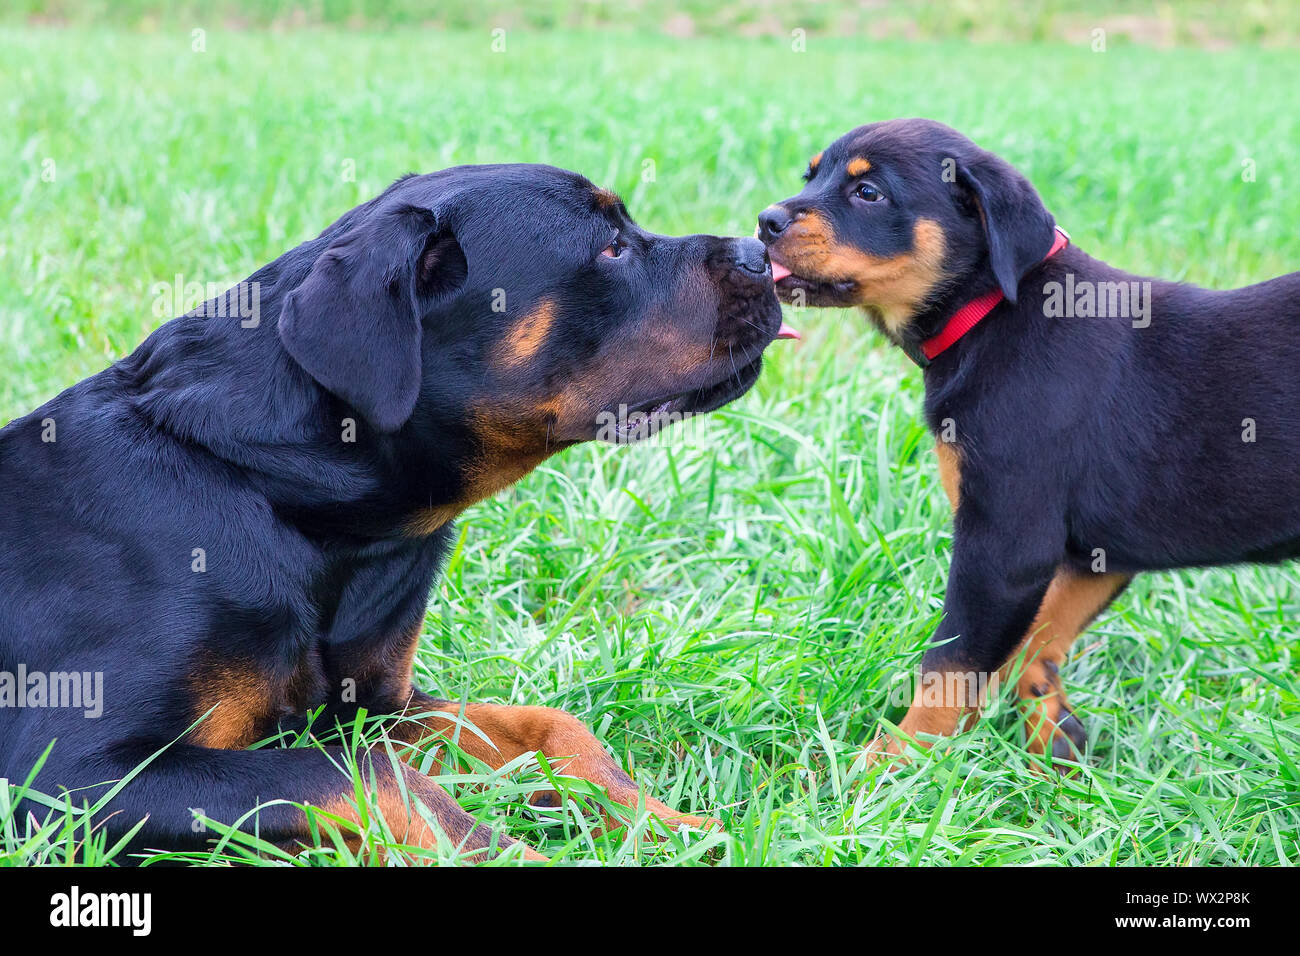 Puppy and adult rottweiler licking each other Stock Photo